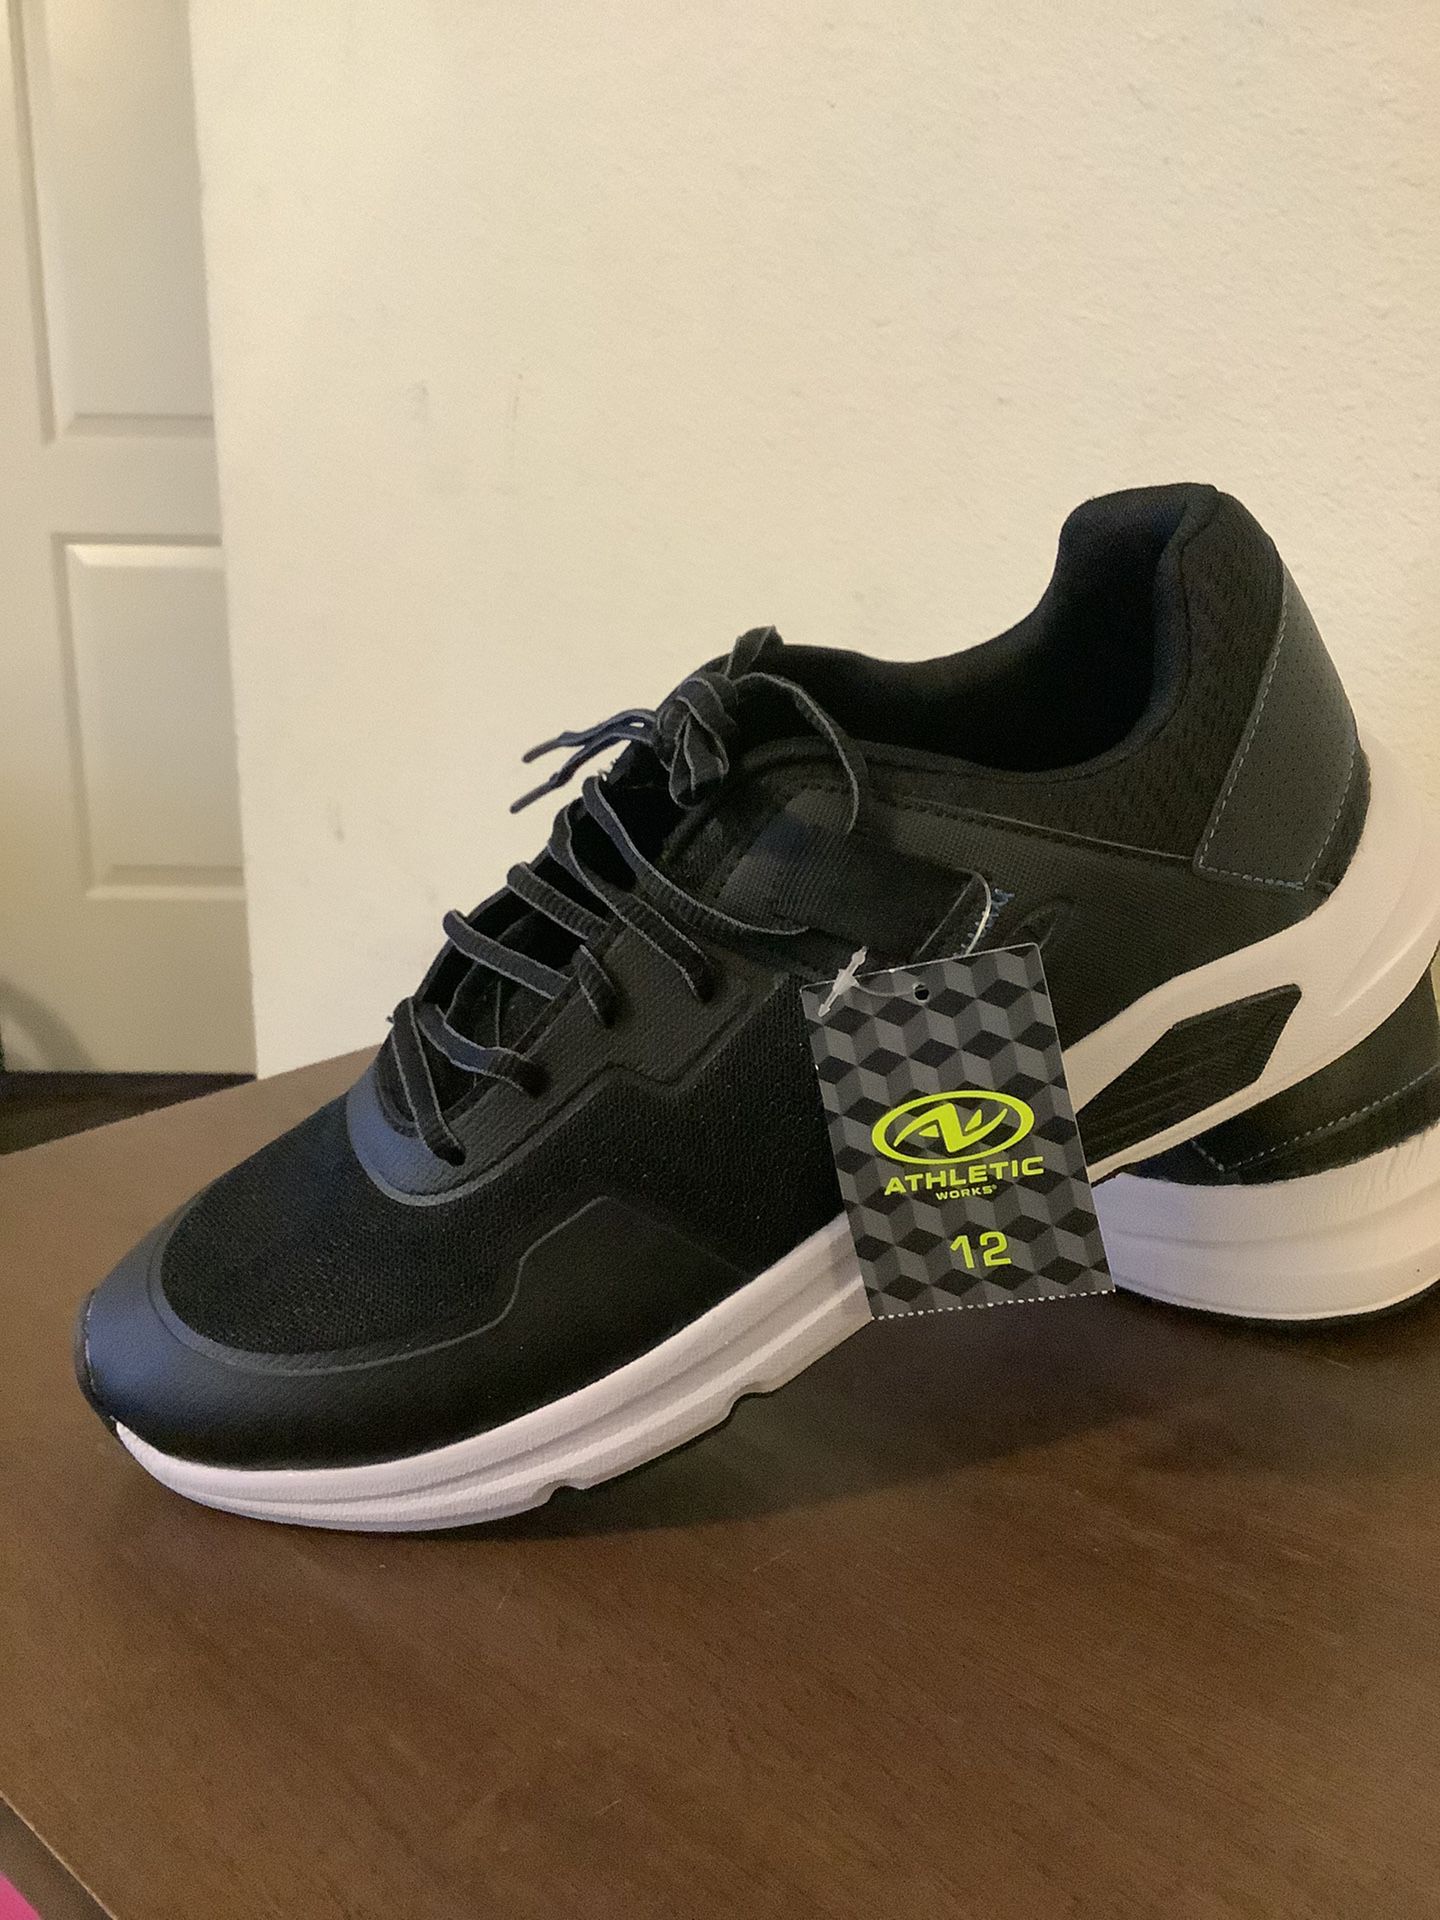 Athletic Works Men's Basic Athletic Shoe Size 10 Memory Foam MNAW48DP002  for Sale in Nazareth, PA - OfferUp